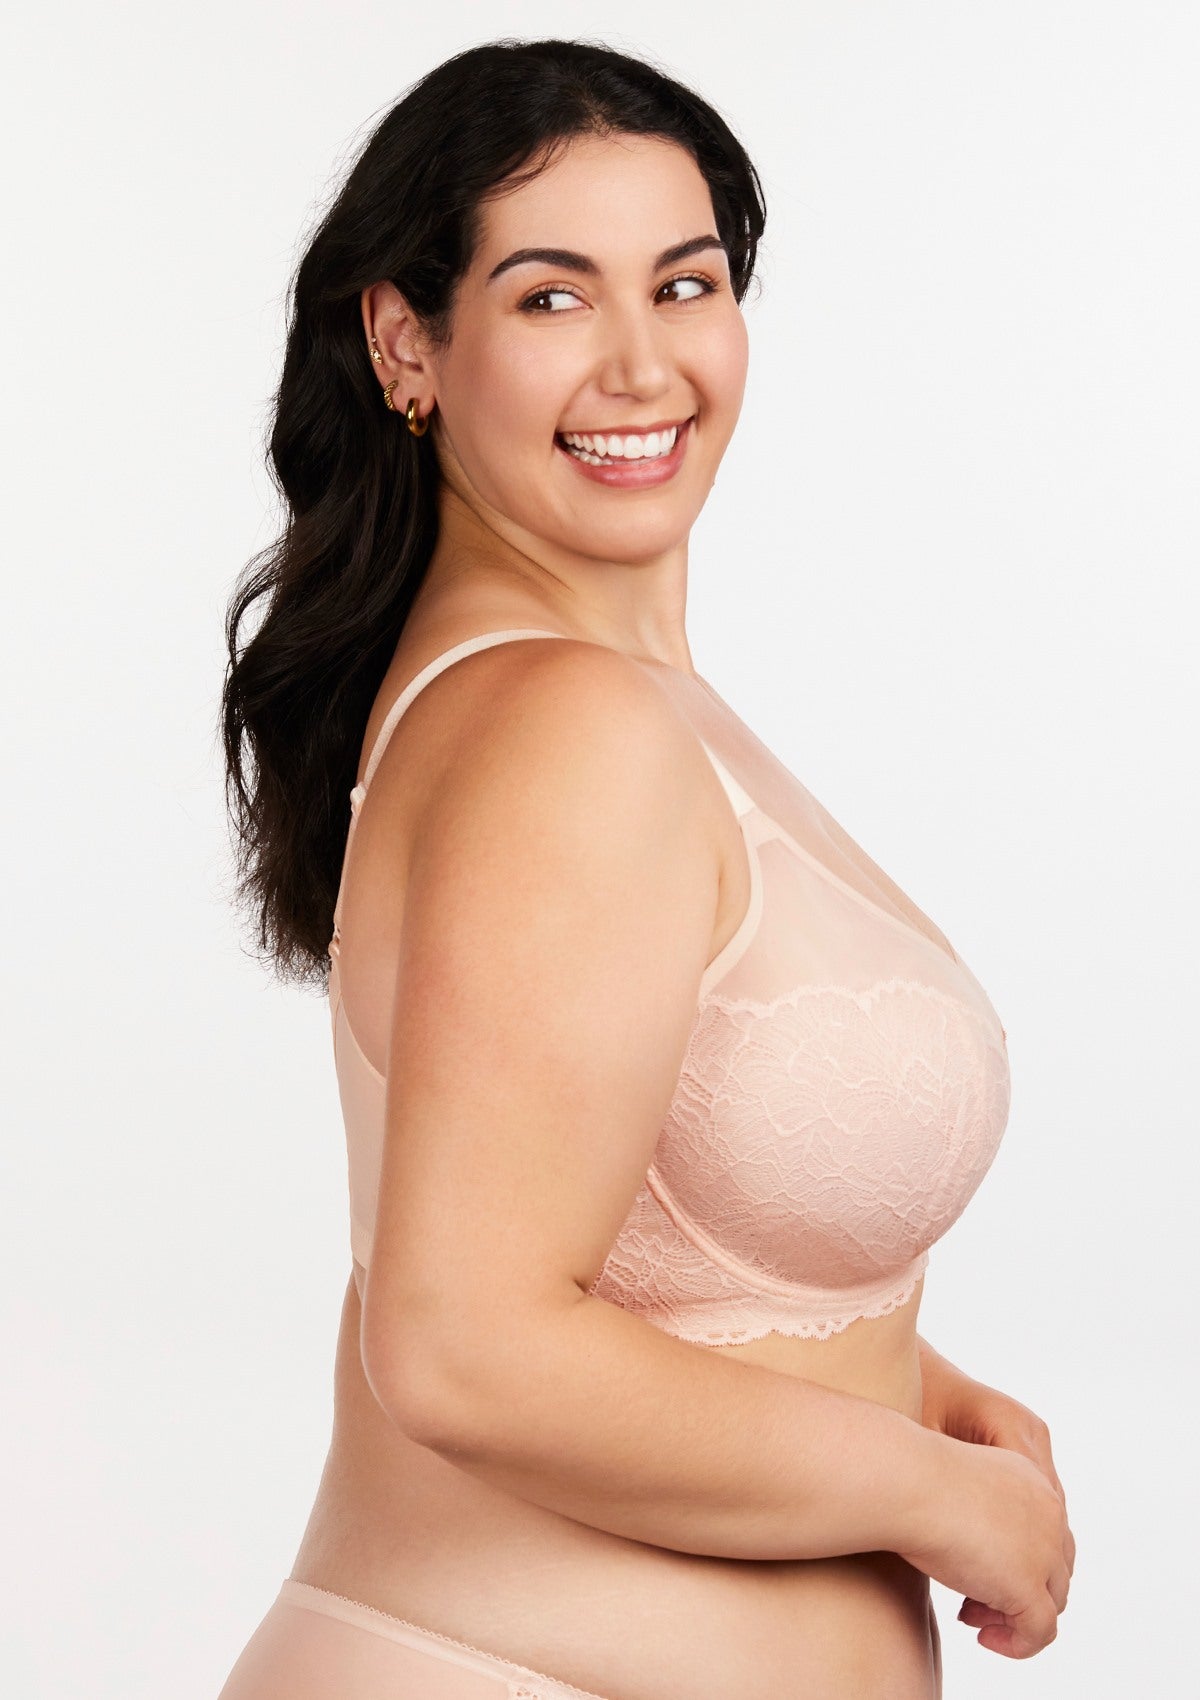 HSIA Blossom Sheer Lace Bra: Comfortable Underwire Bra For Big Busts - White / 38 / DDD/F